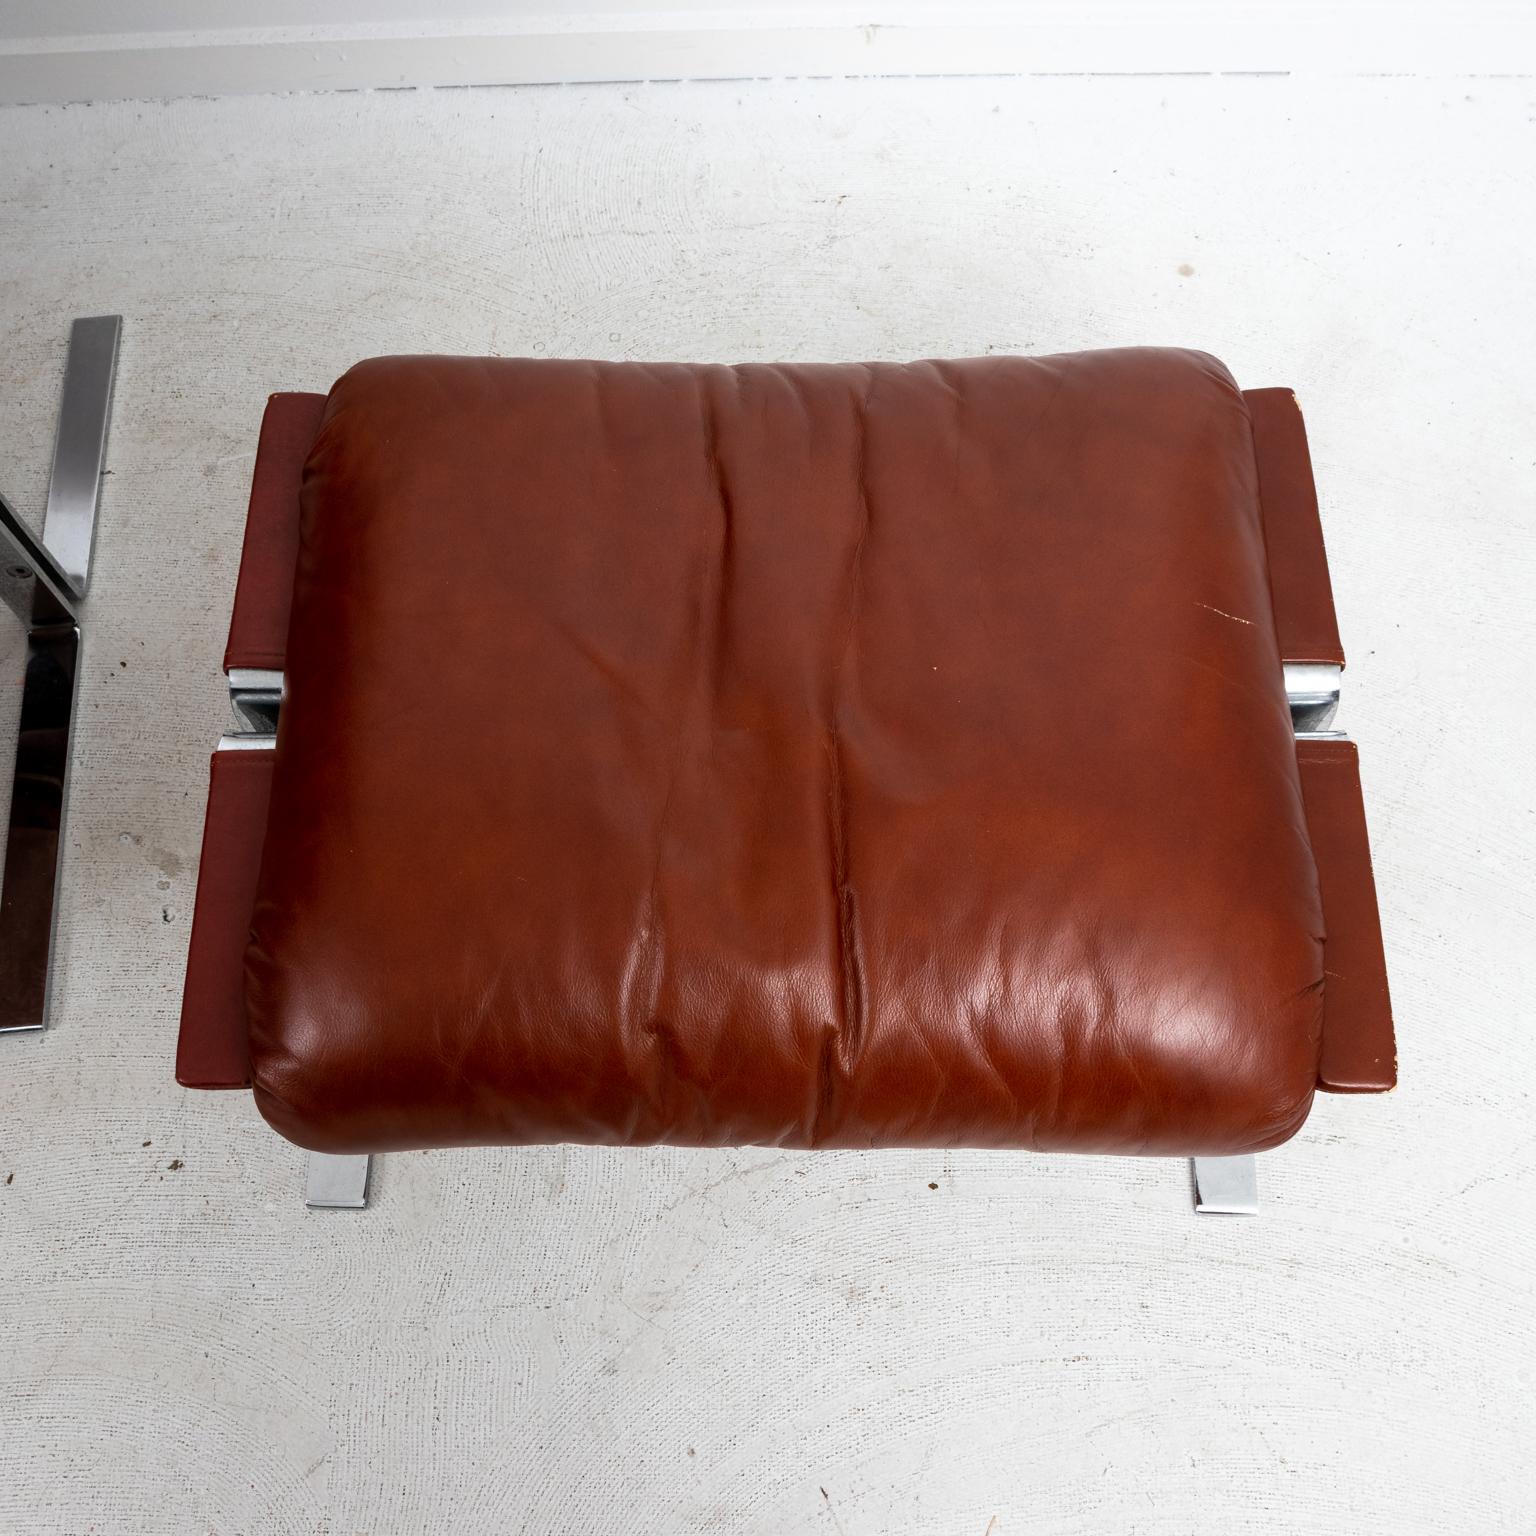 Metal Pair of Leather Upholstered Chairs with Ottomans